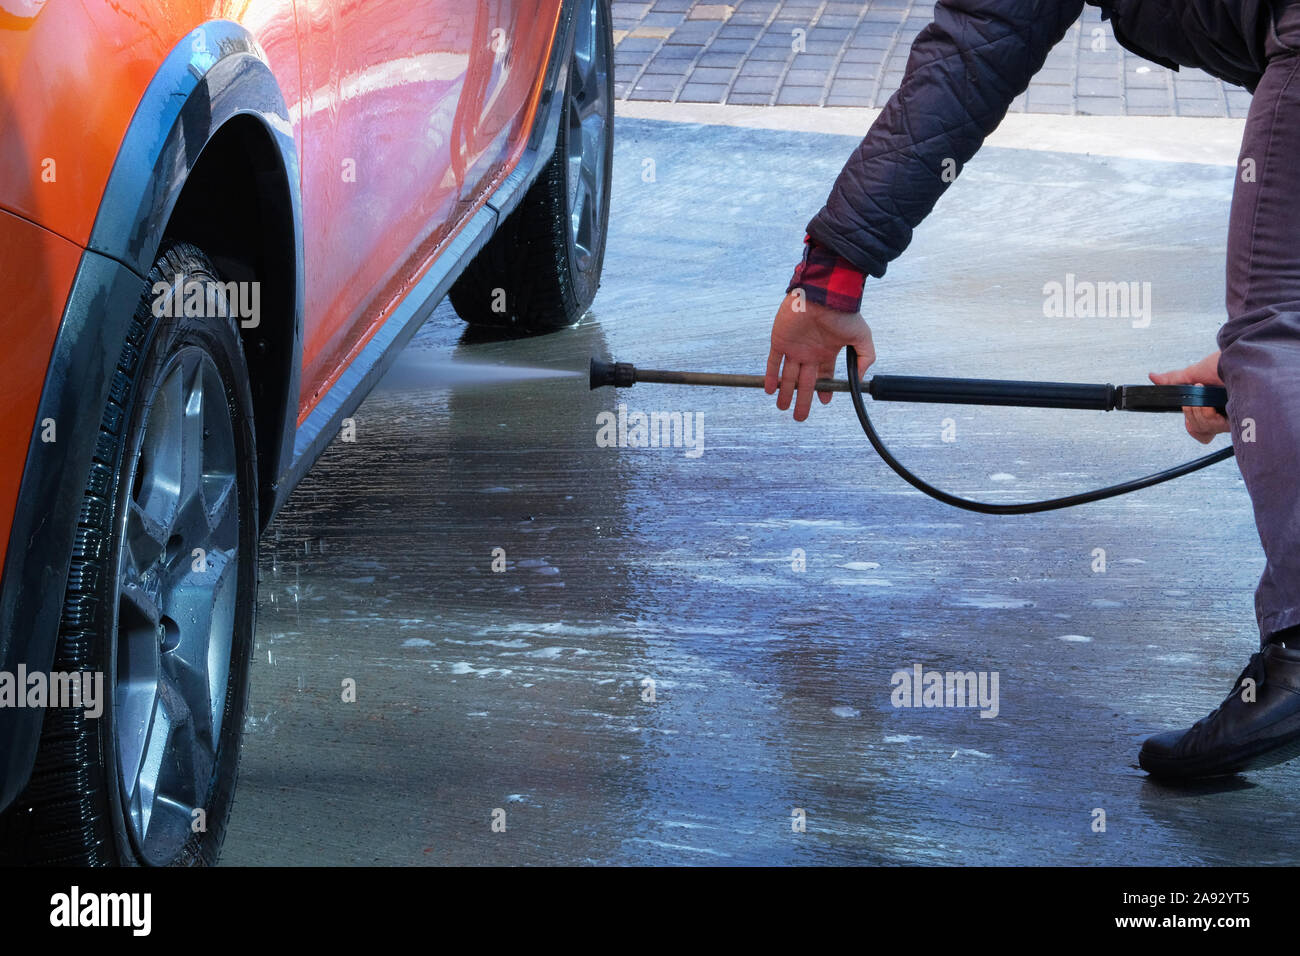 Cleaning with water at self-service car wash. Man washes his orange car at car wash in outdoors. Stock Photo